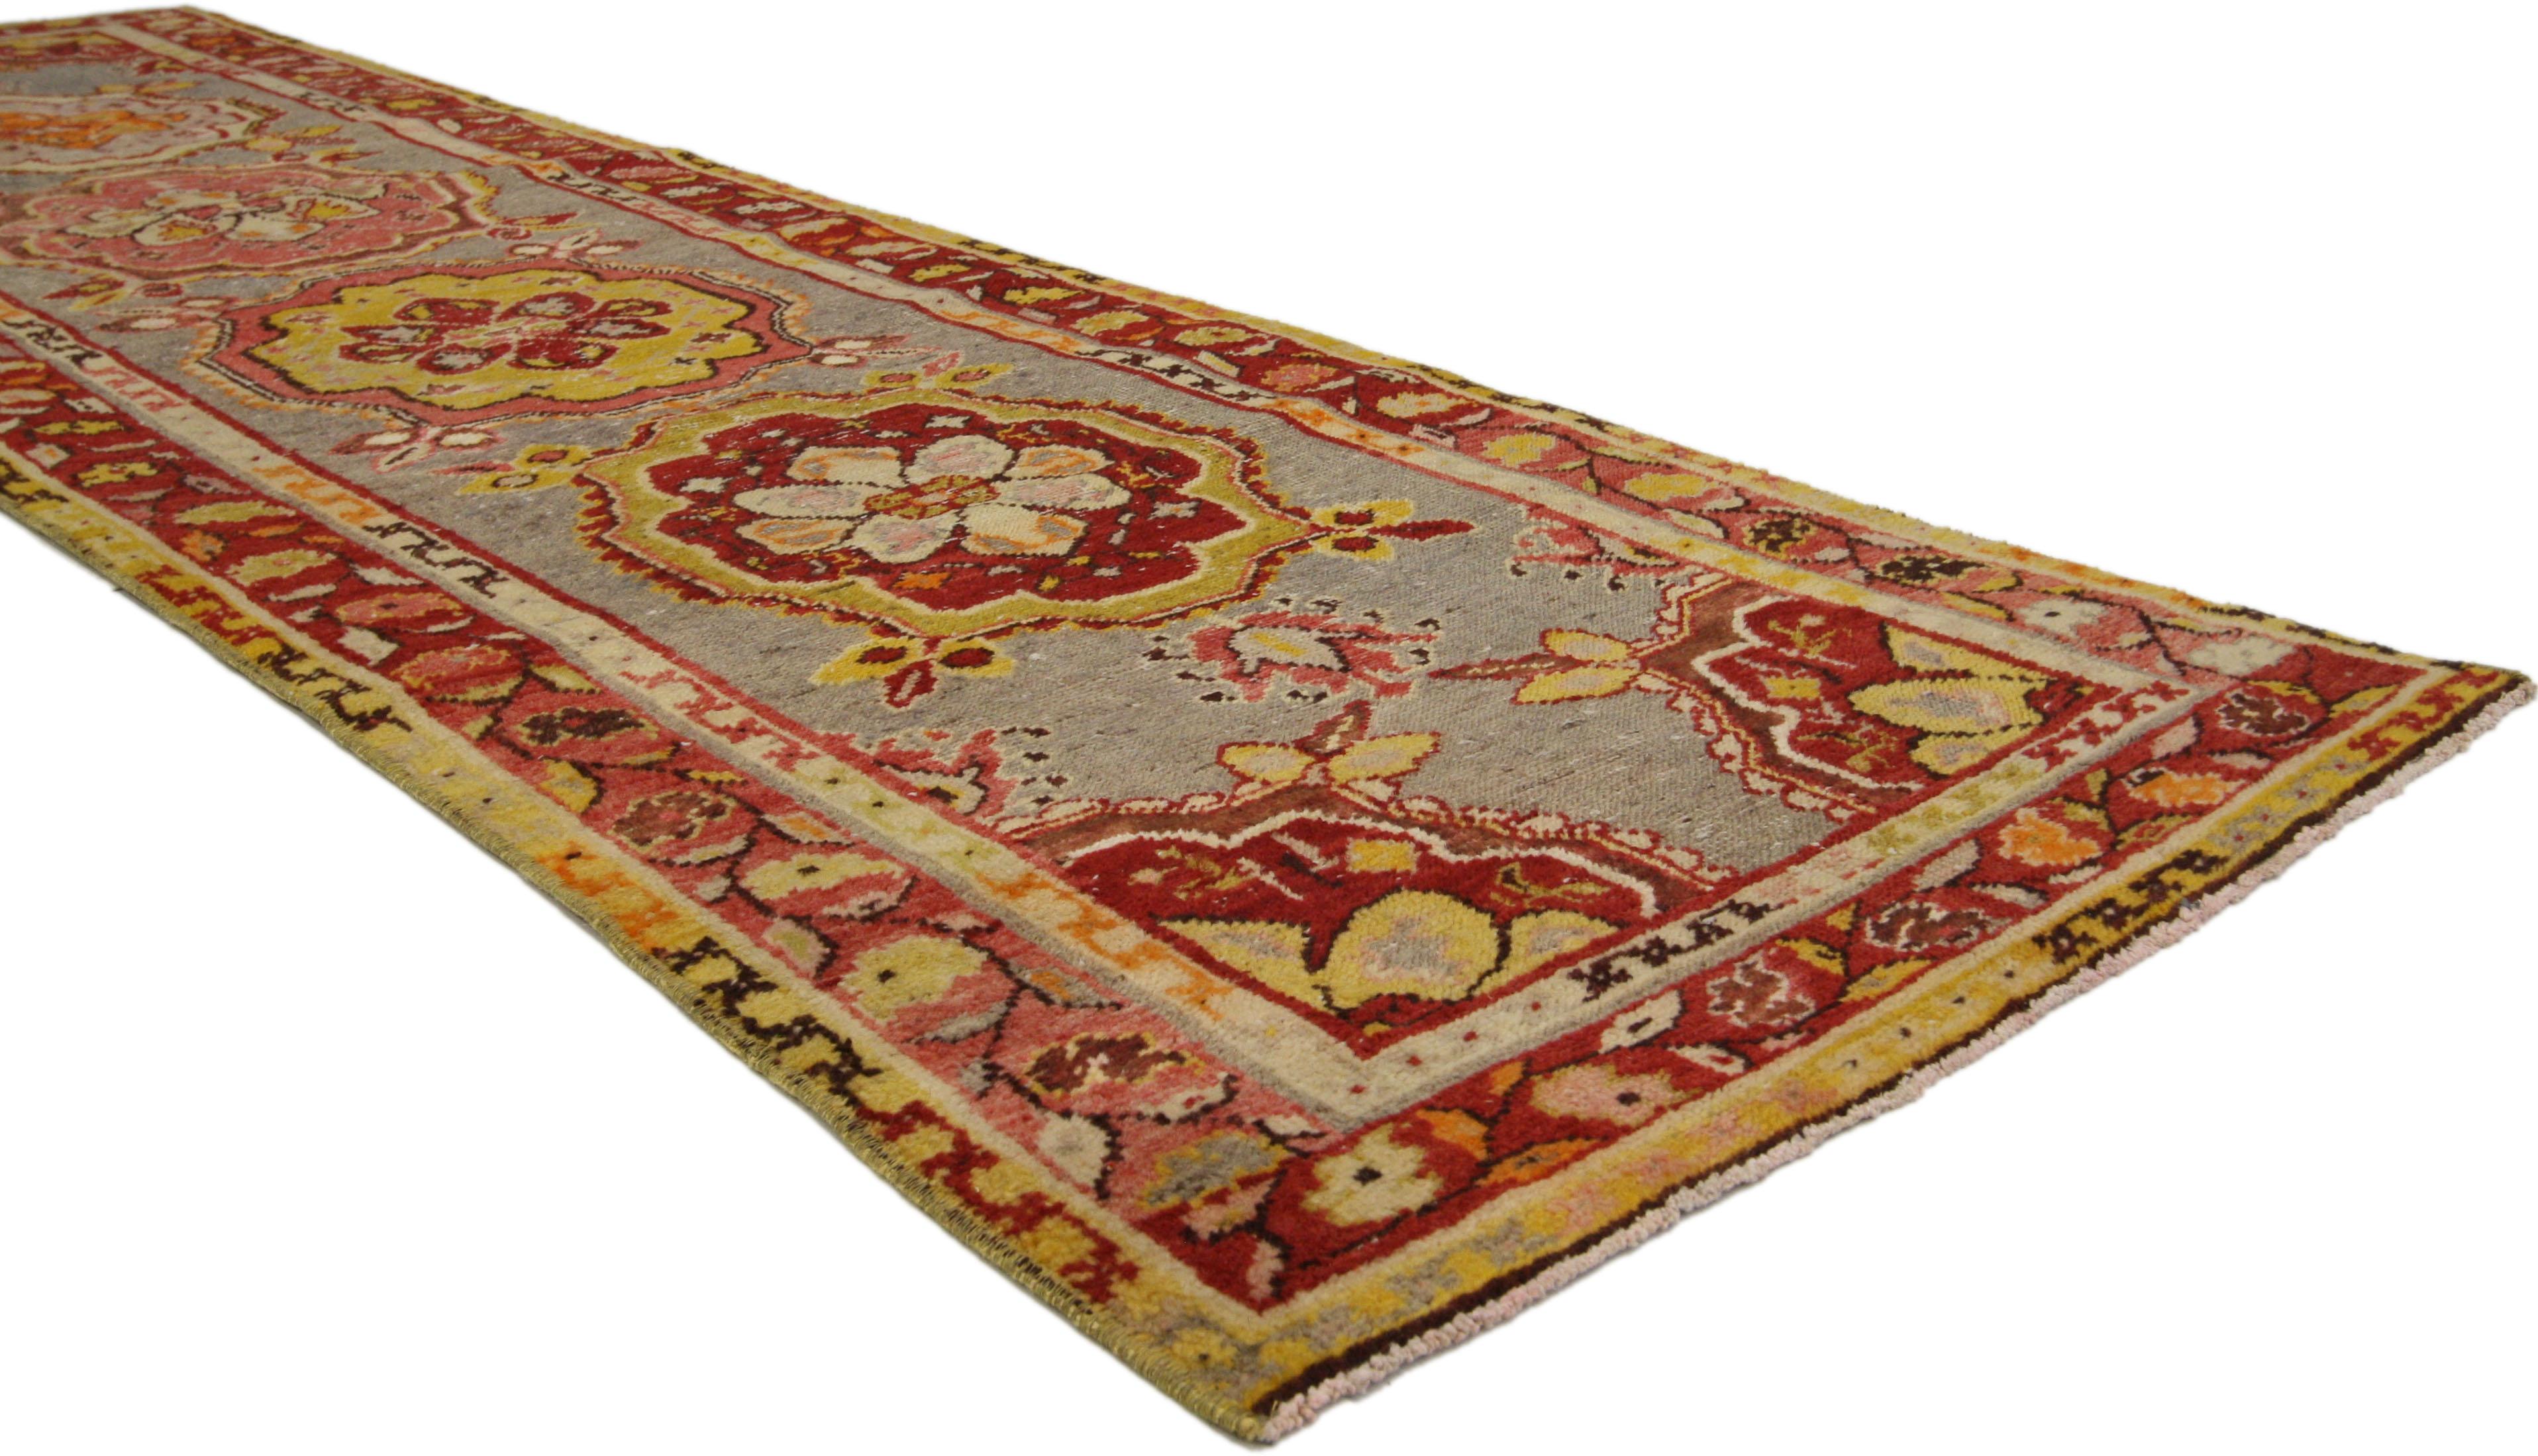 52296 Distressed Vintage Turkish Oushak Runner with Rustic Jacobean Style 02’10 x 09’11. Soft and sumptuous, this hand knotted wool distressed vintage Turkish Oushak rug with Jacobean style brings regal allure and rusticity to any interior it